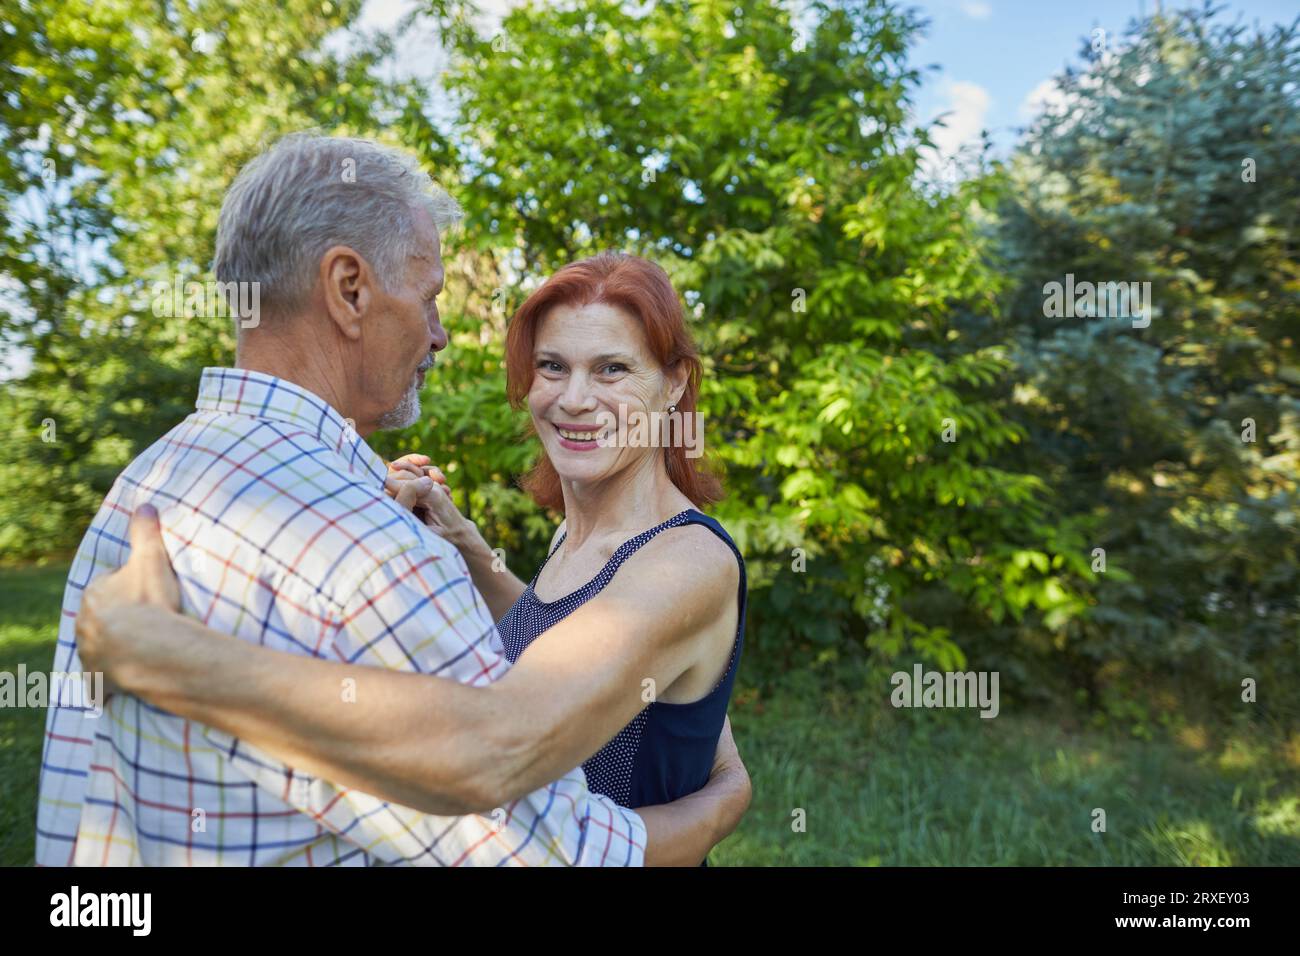 Smiling adult woman on outdoor dances with man and look at camera Stock Photo